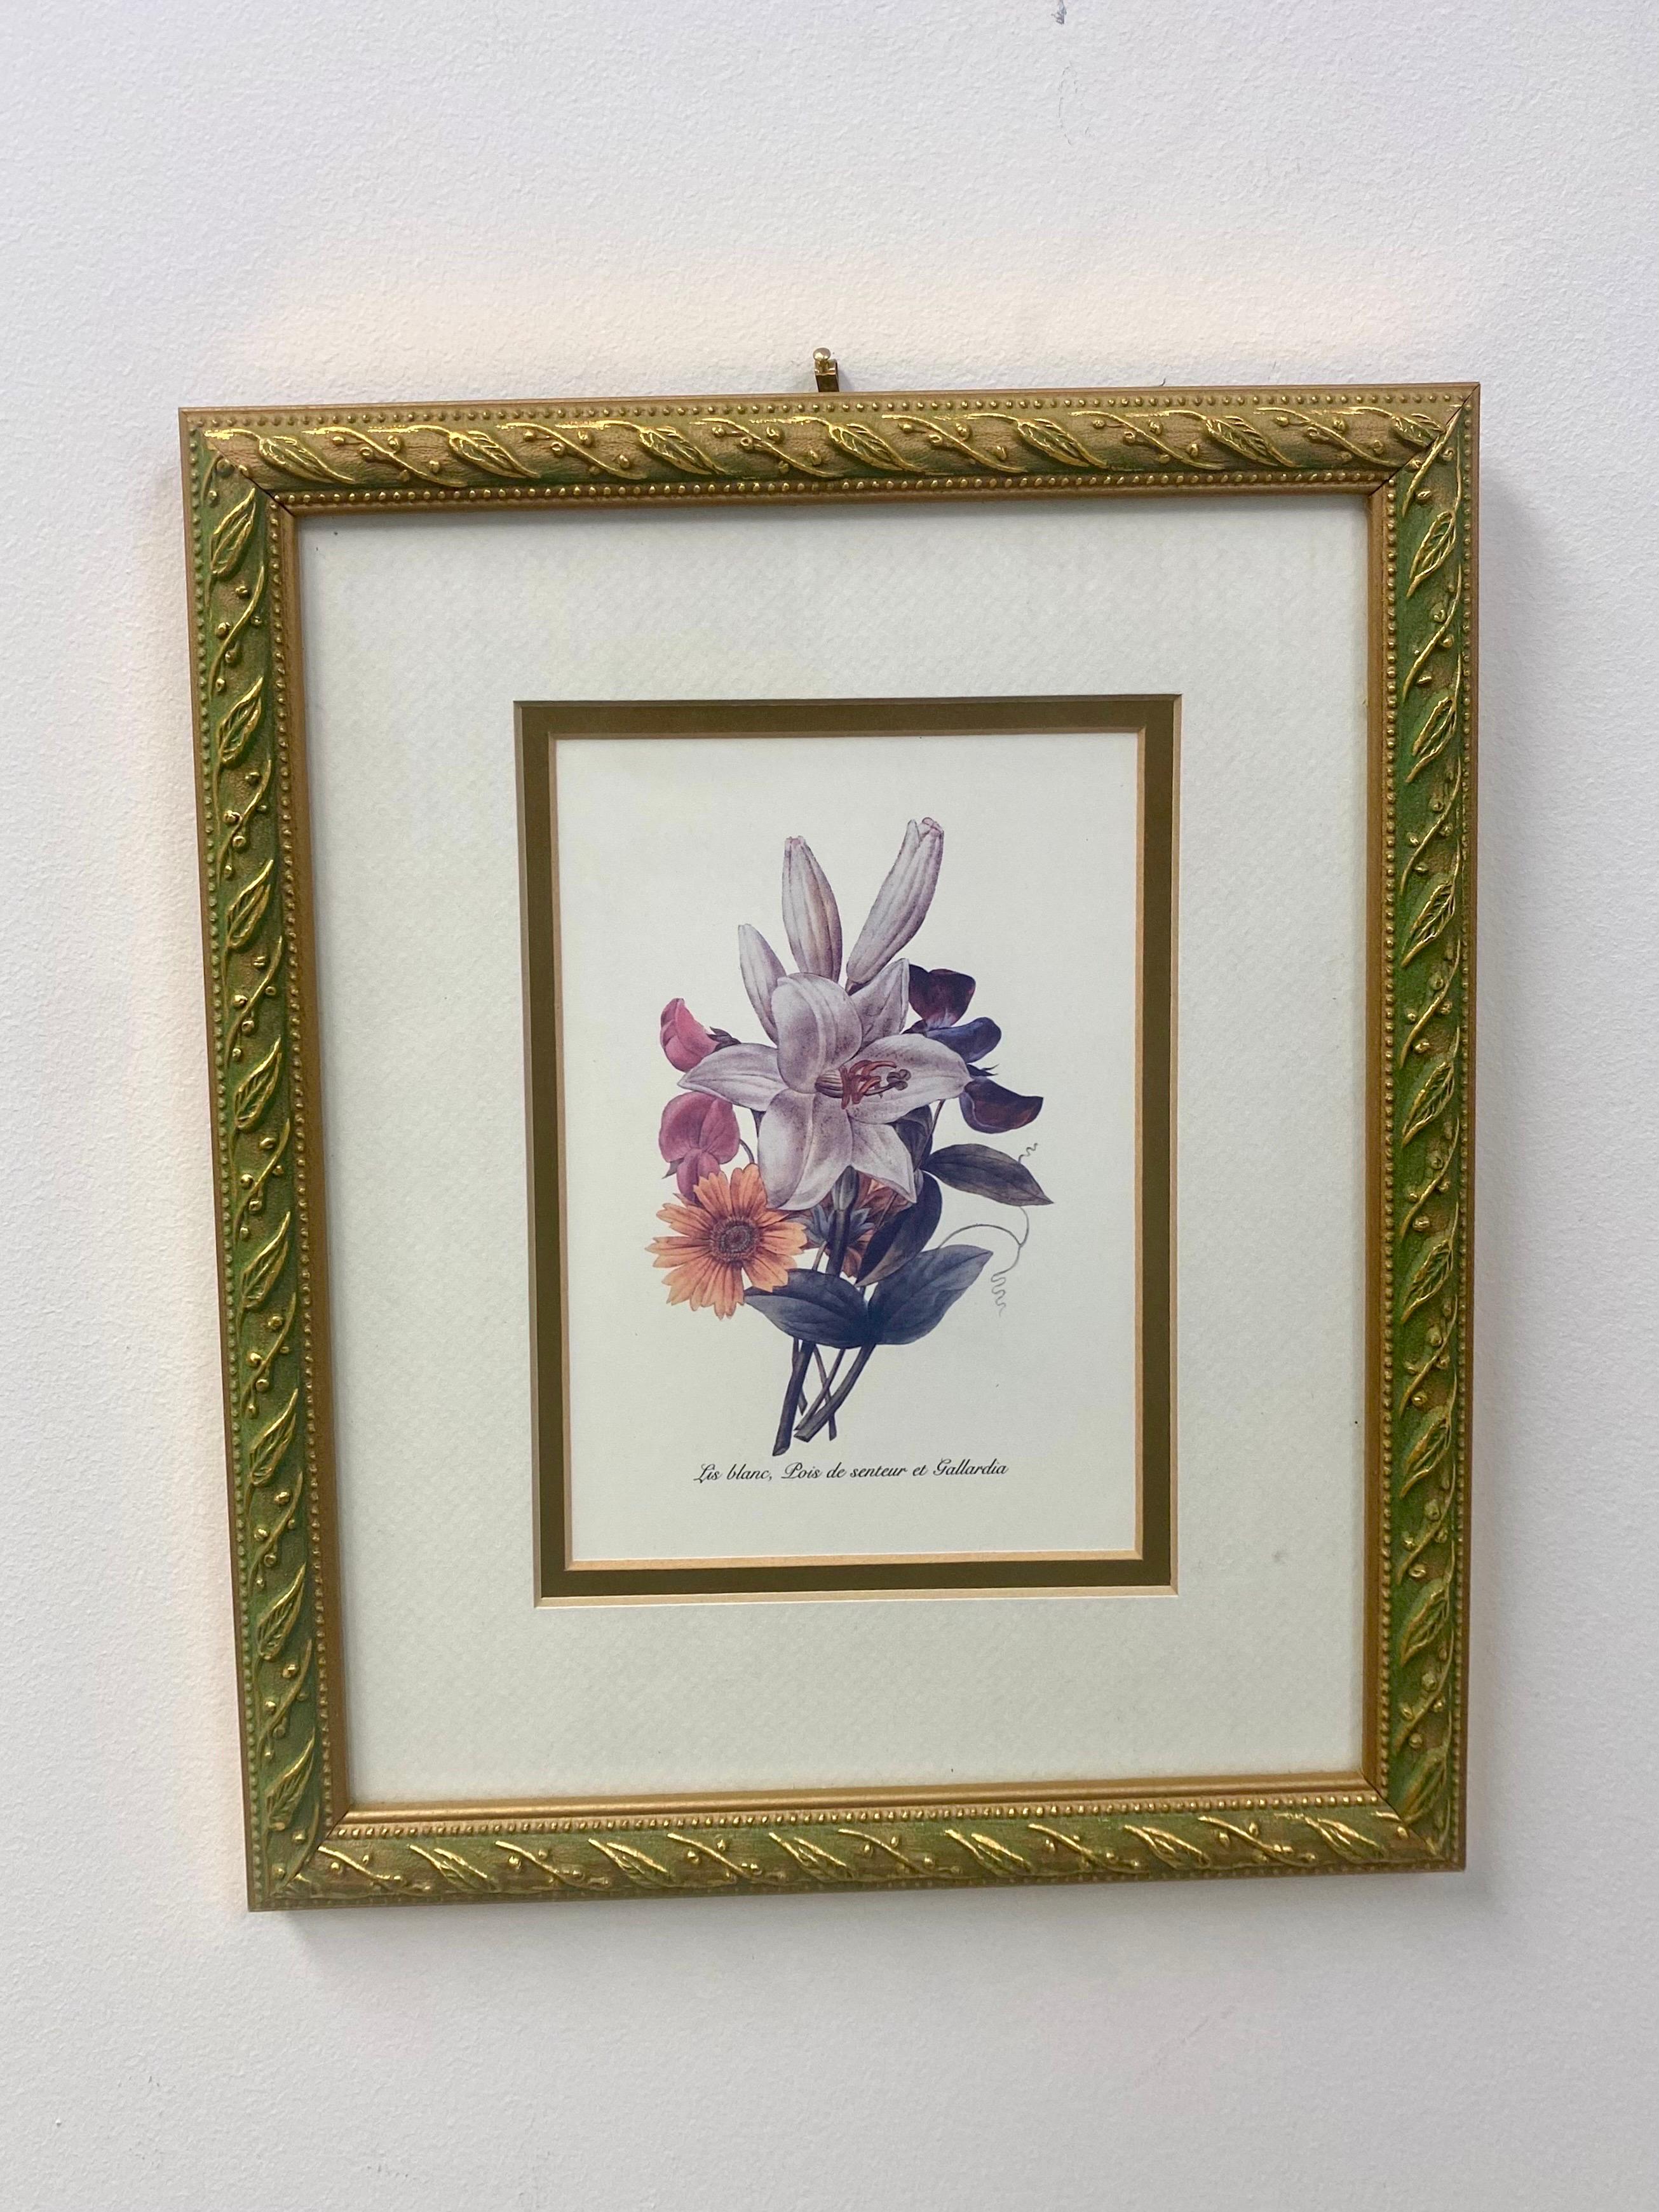 A set of 4 Mid Century Botanicals featuring Lis Blanc, Pois de Senteur, Gallarda, Oillets, Gyclamer et Pensees. 
The set of botanicals is finely matted and framed in gilded frame. 

Dimensions: 11” H x 9.25” W x 1” D
Unframed: 6.5” H x 4.25” W x 1” D